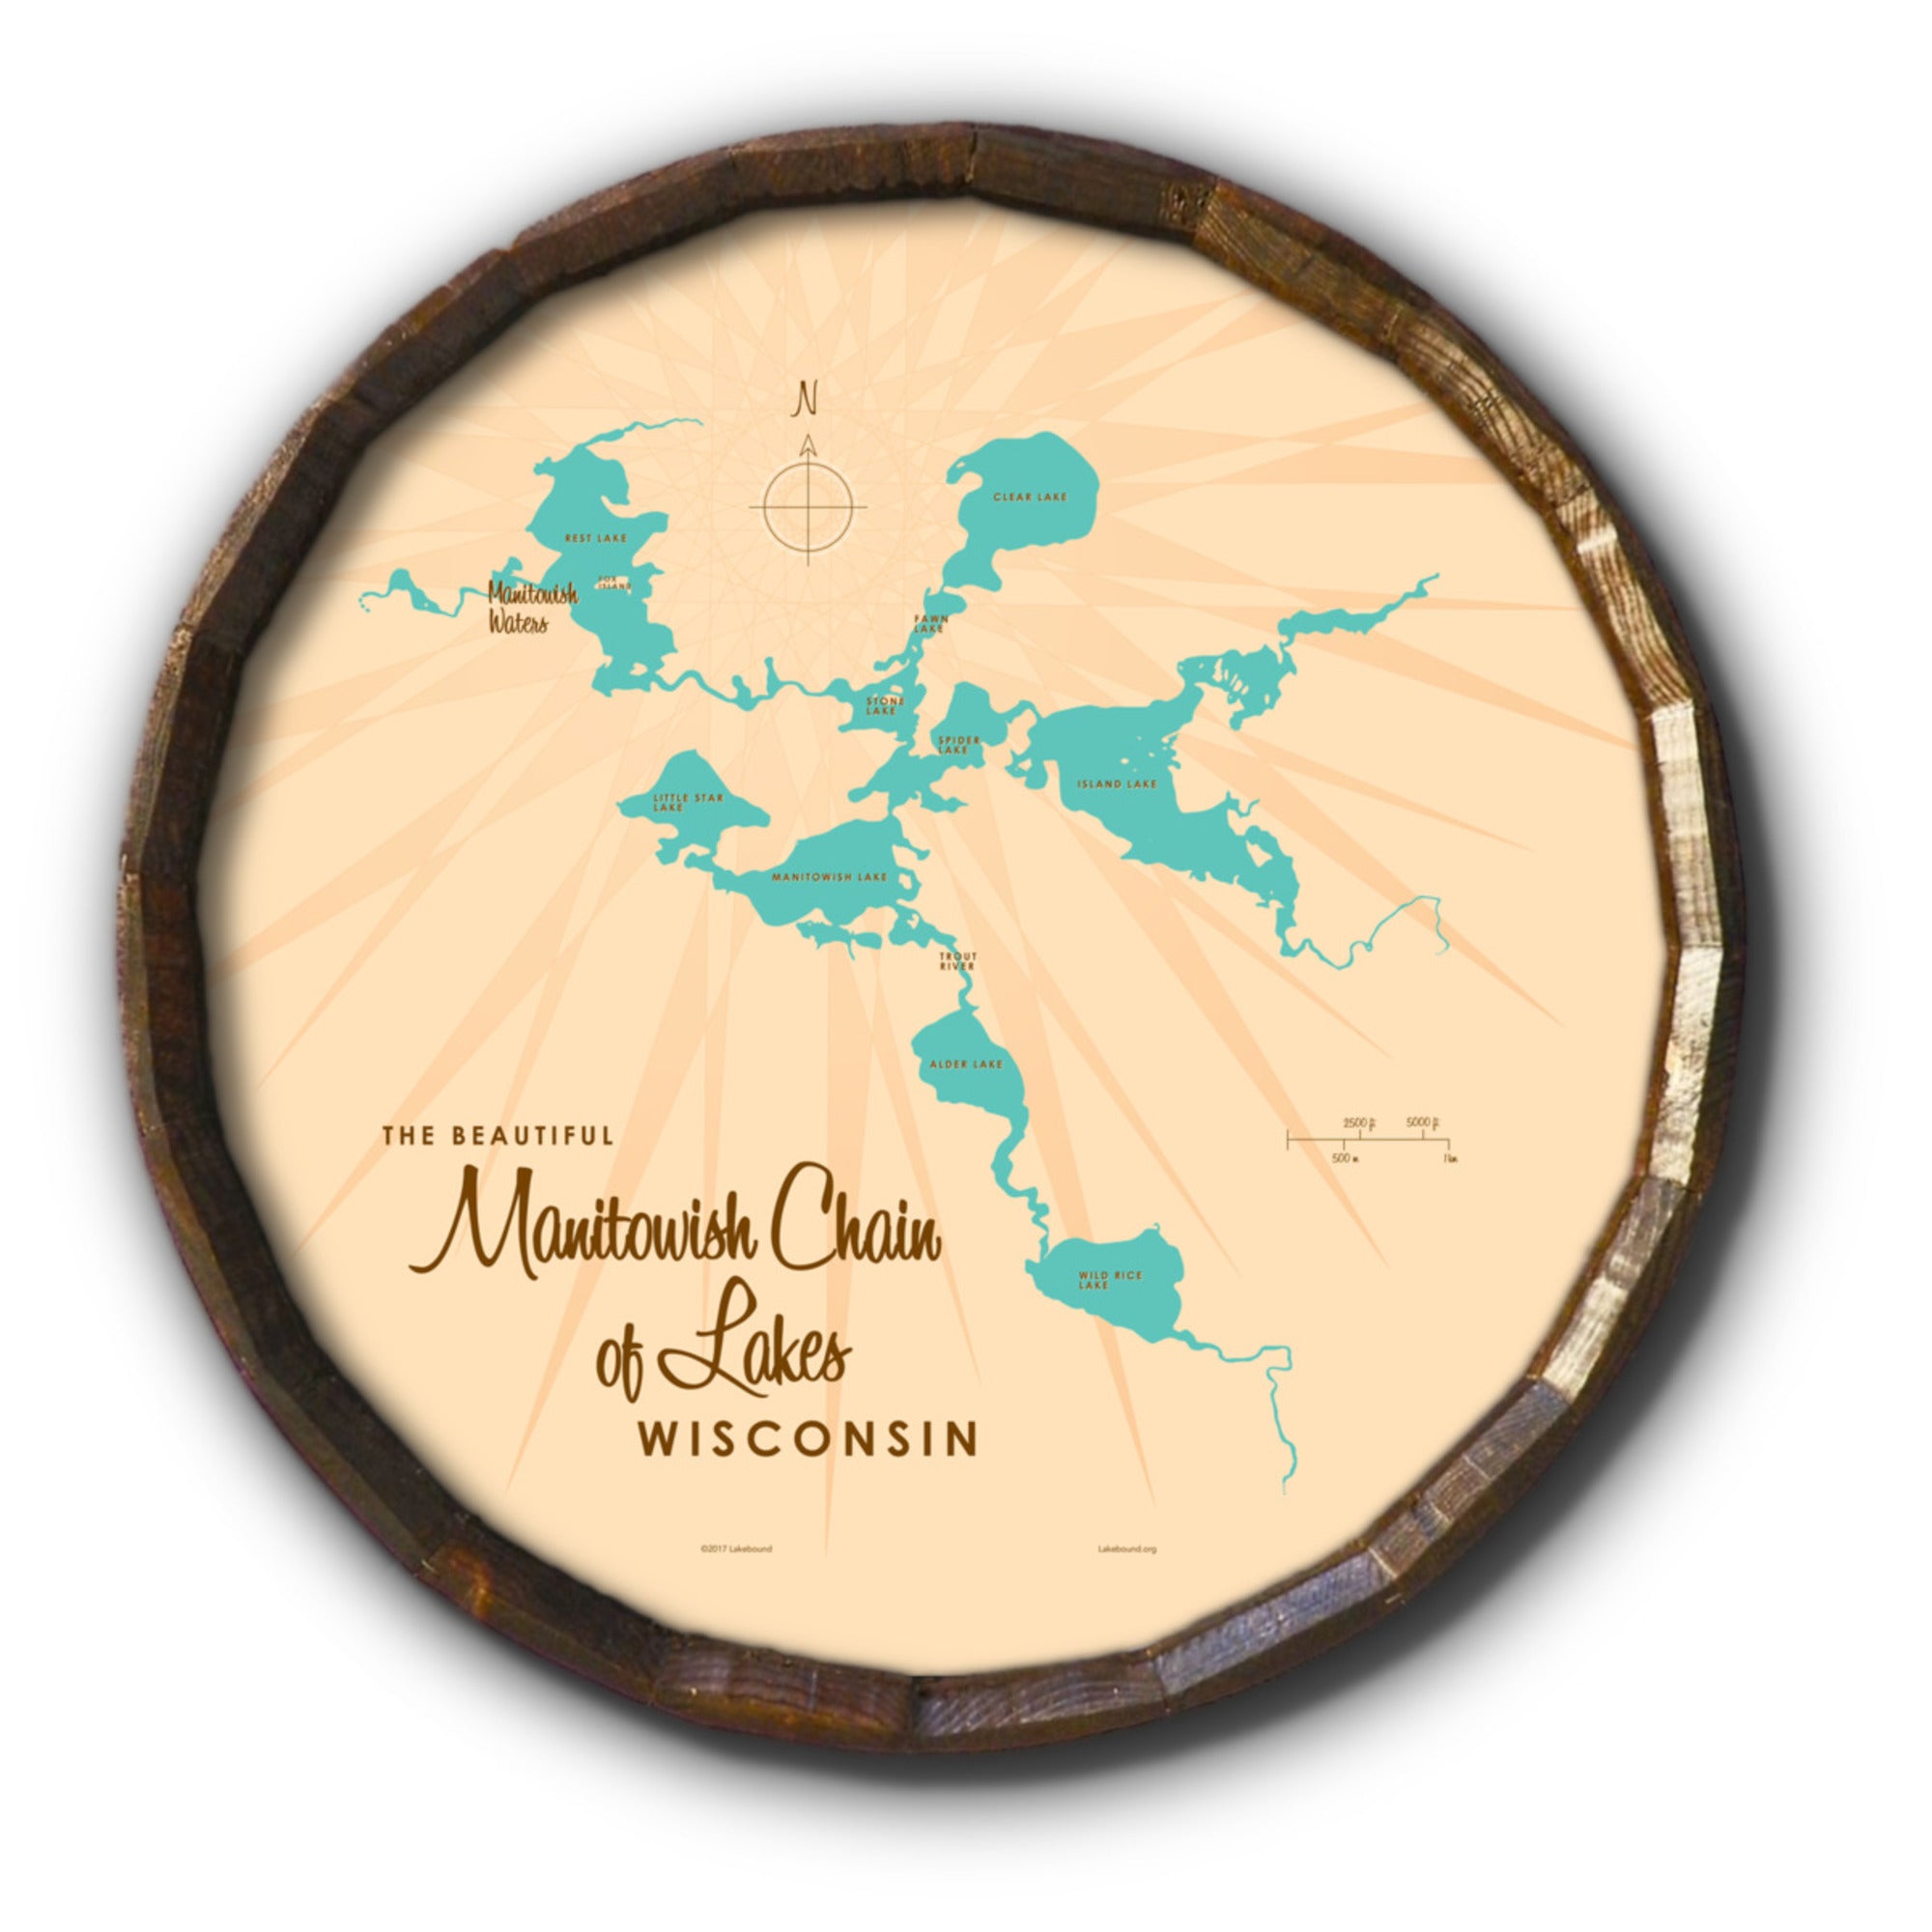 Manitowish Chain of Lakes Wisconsin, Barrel End Map Art